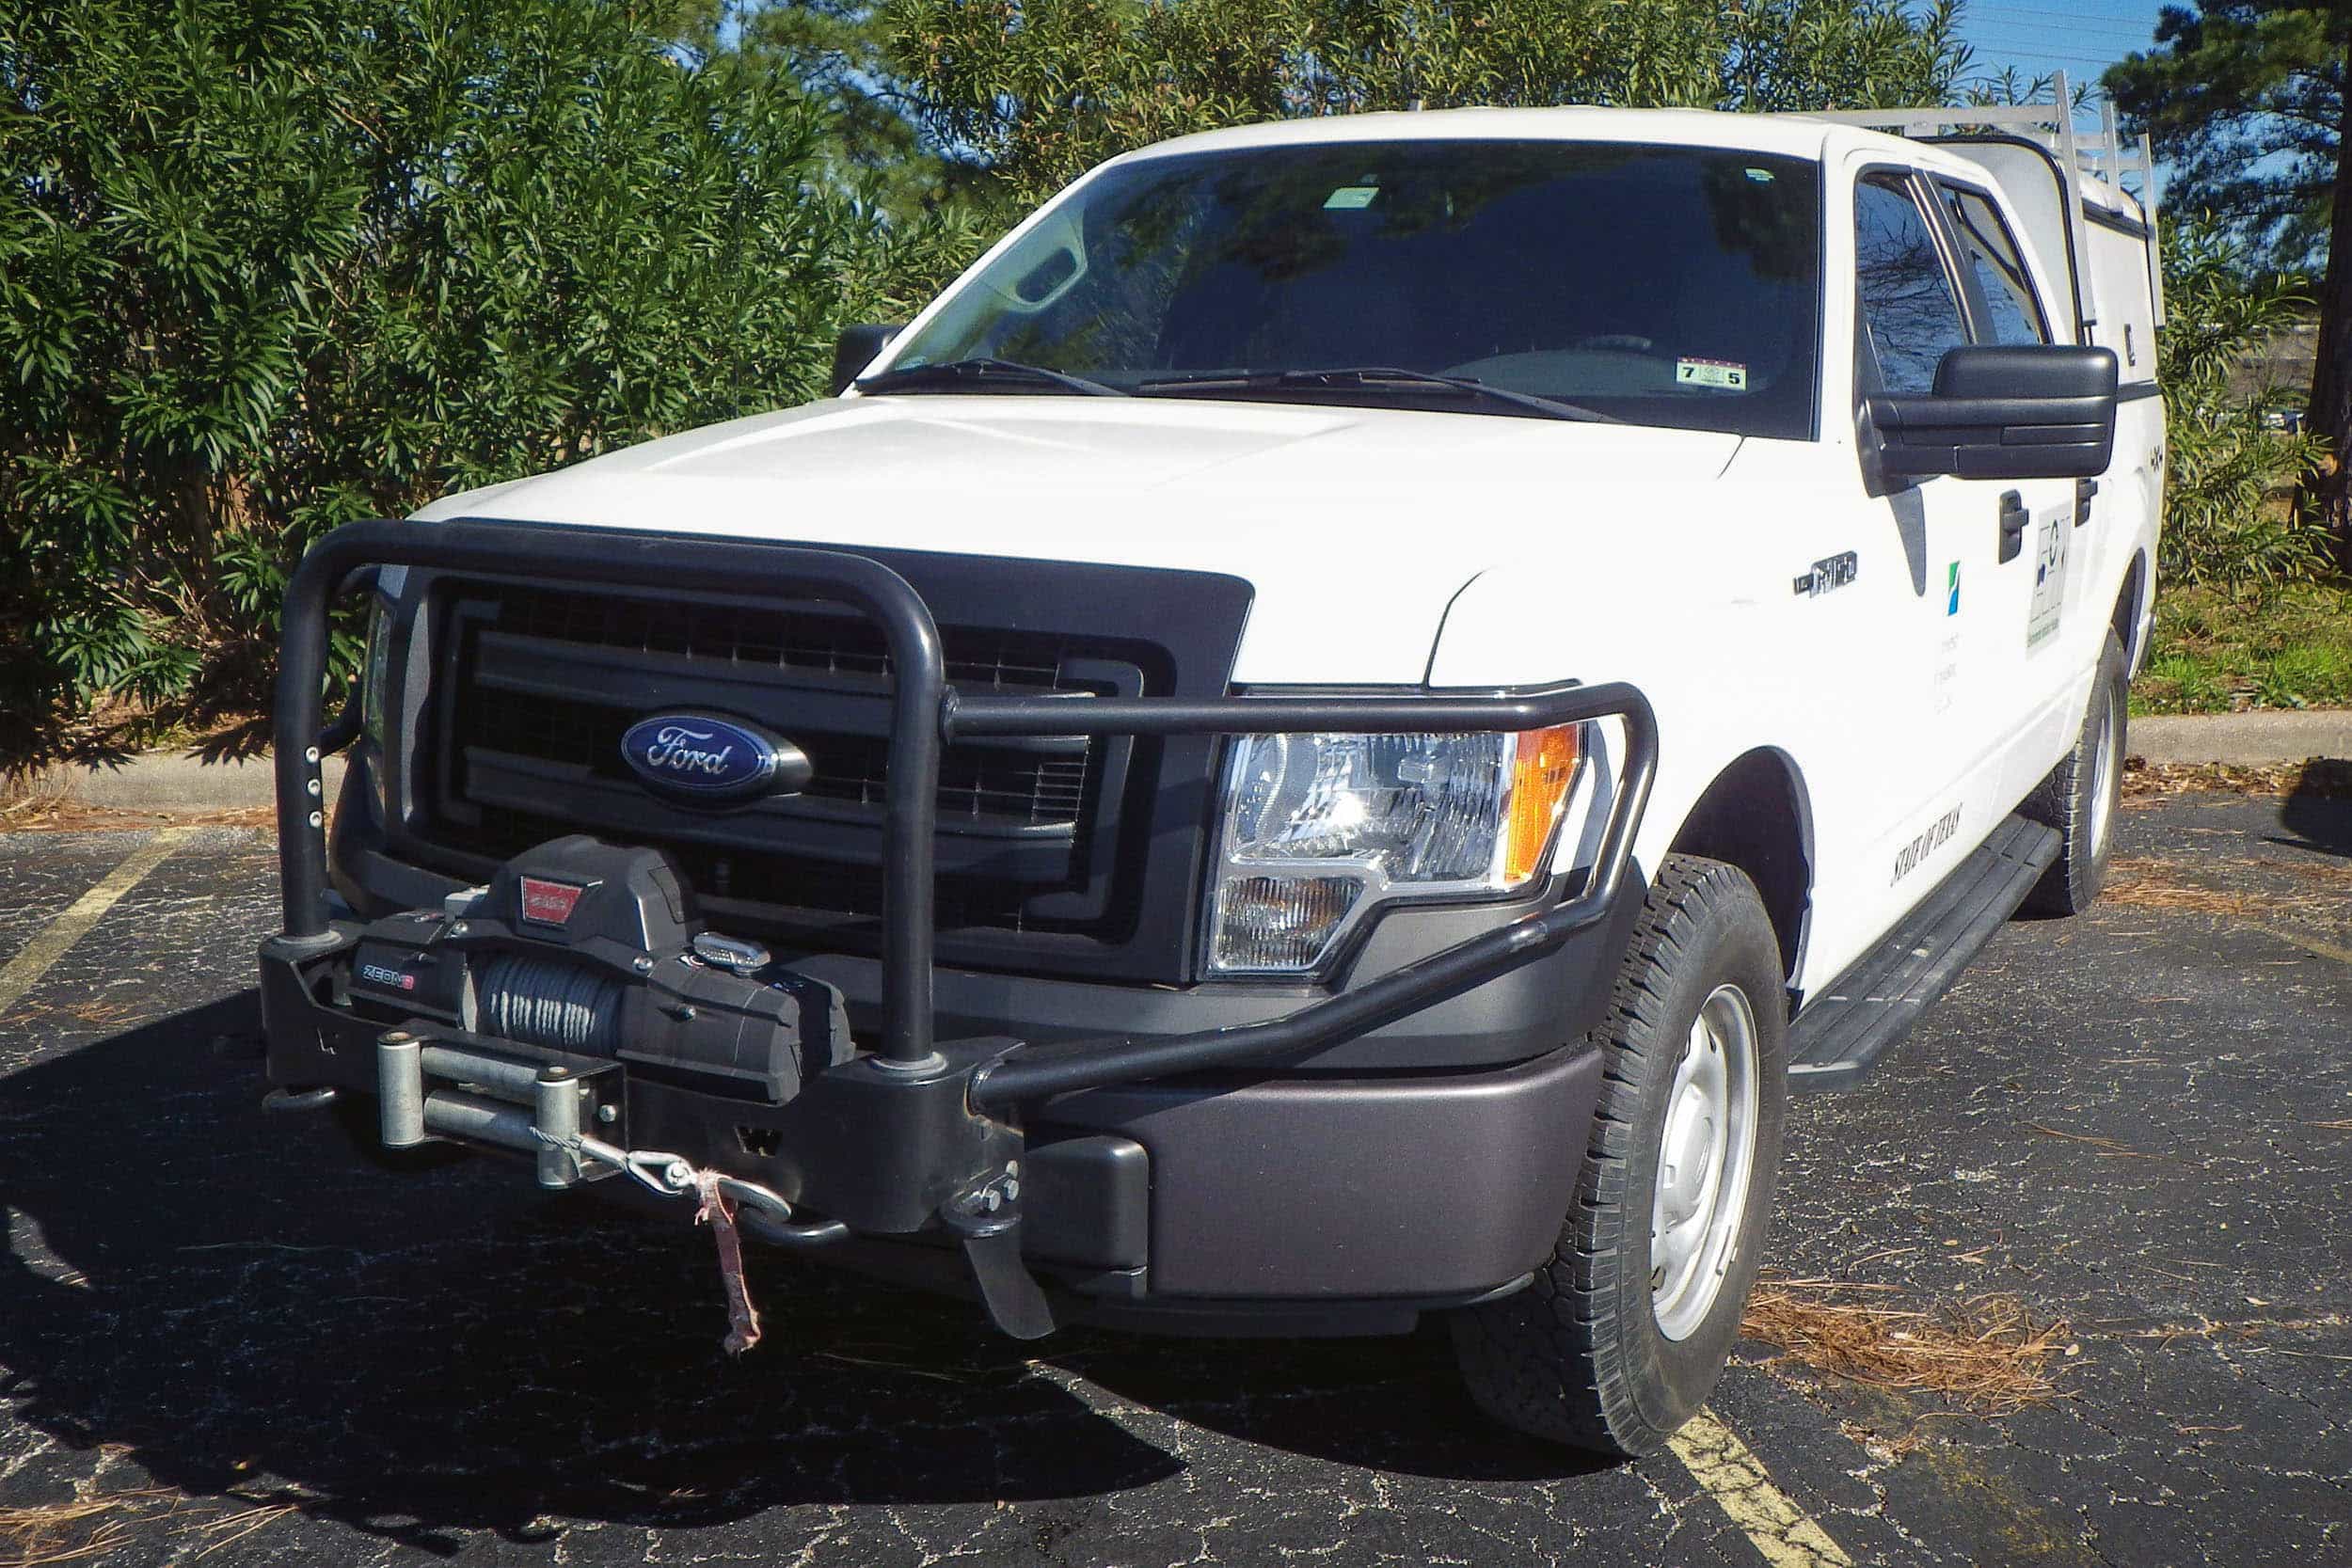 Ford F-150s